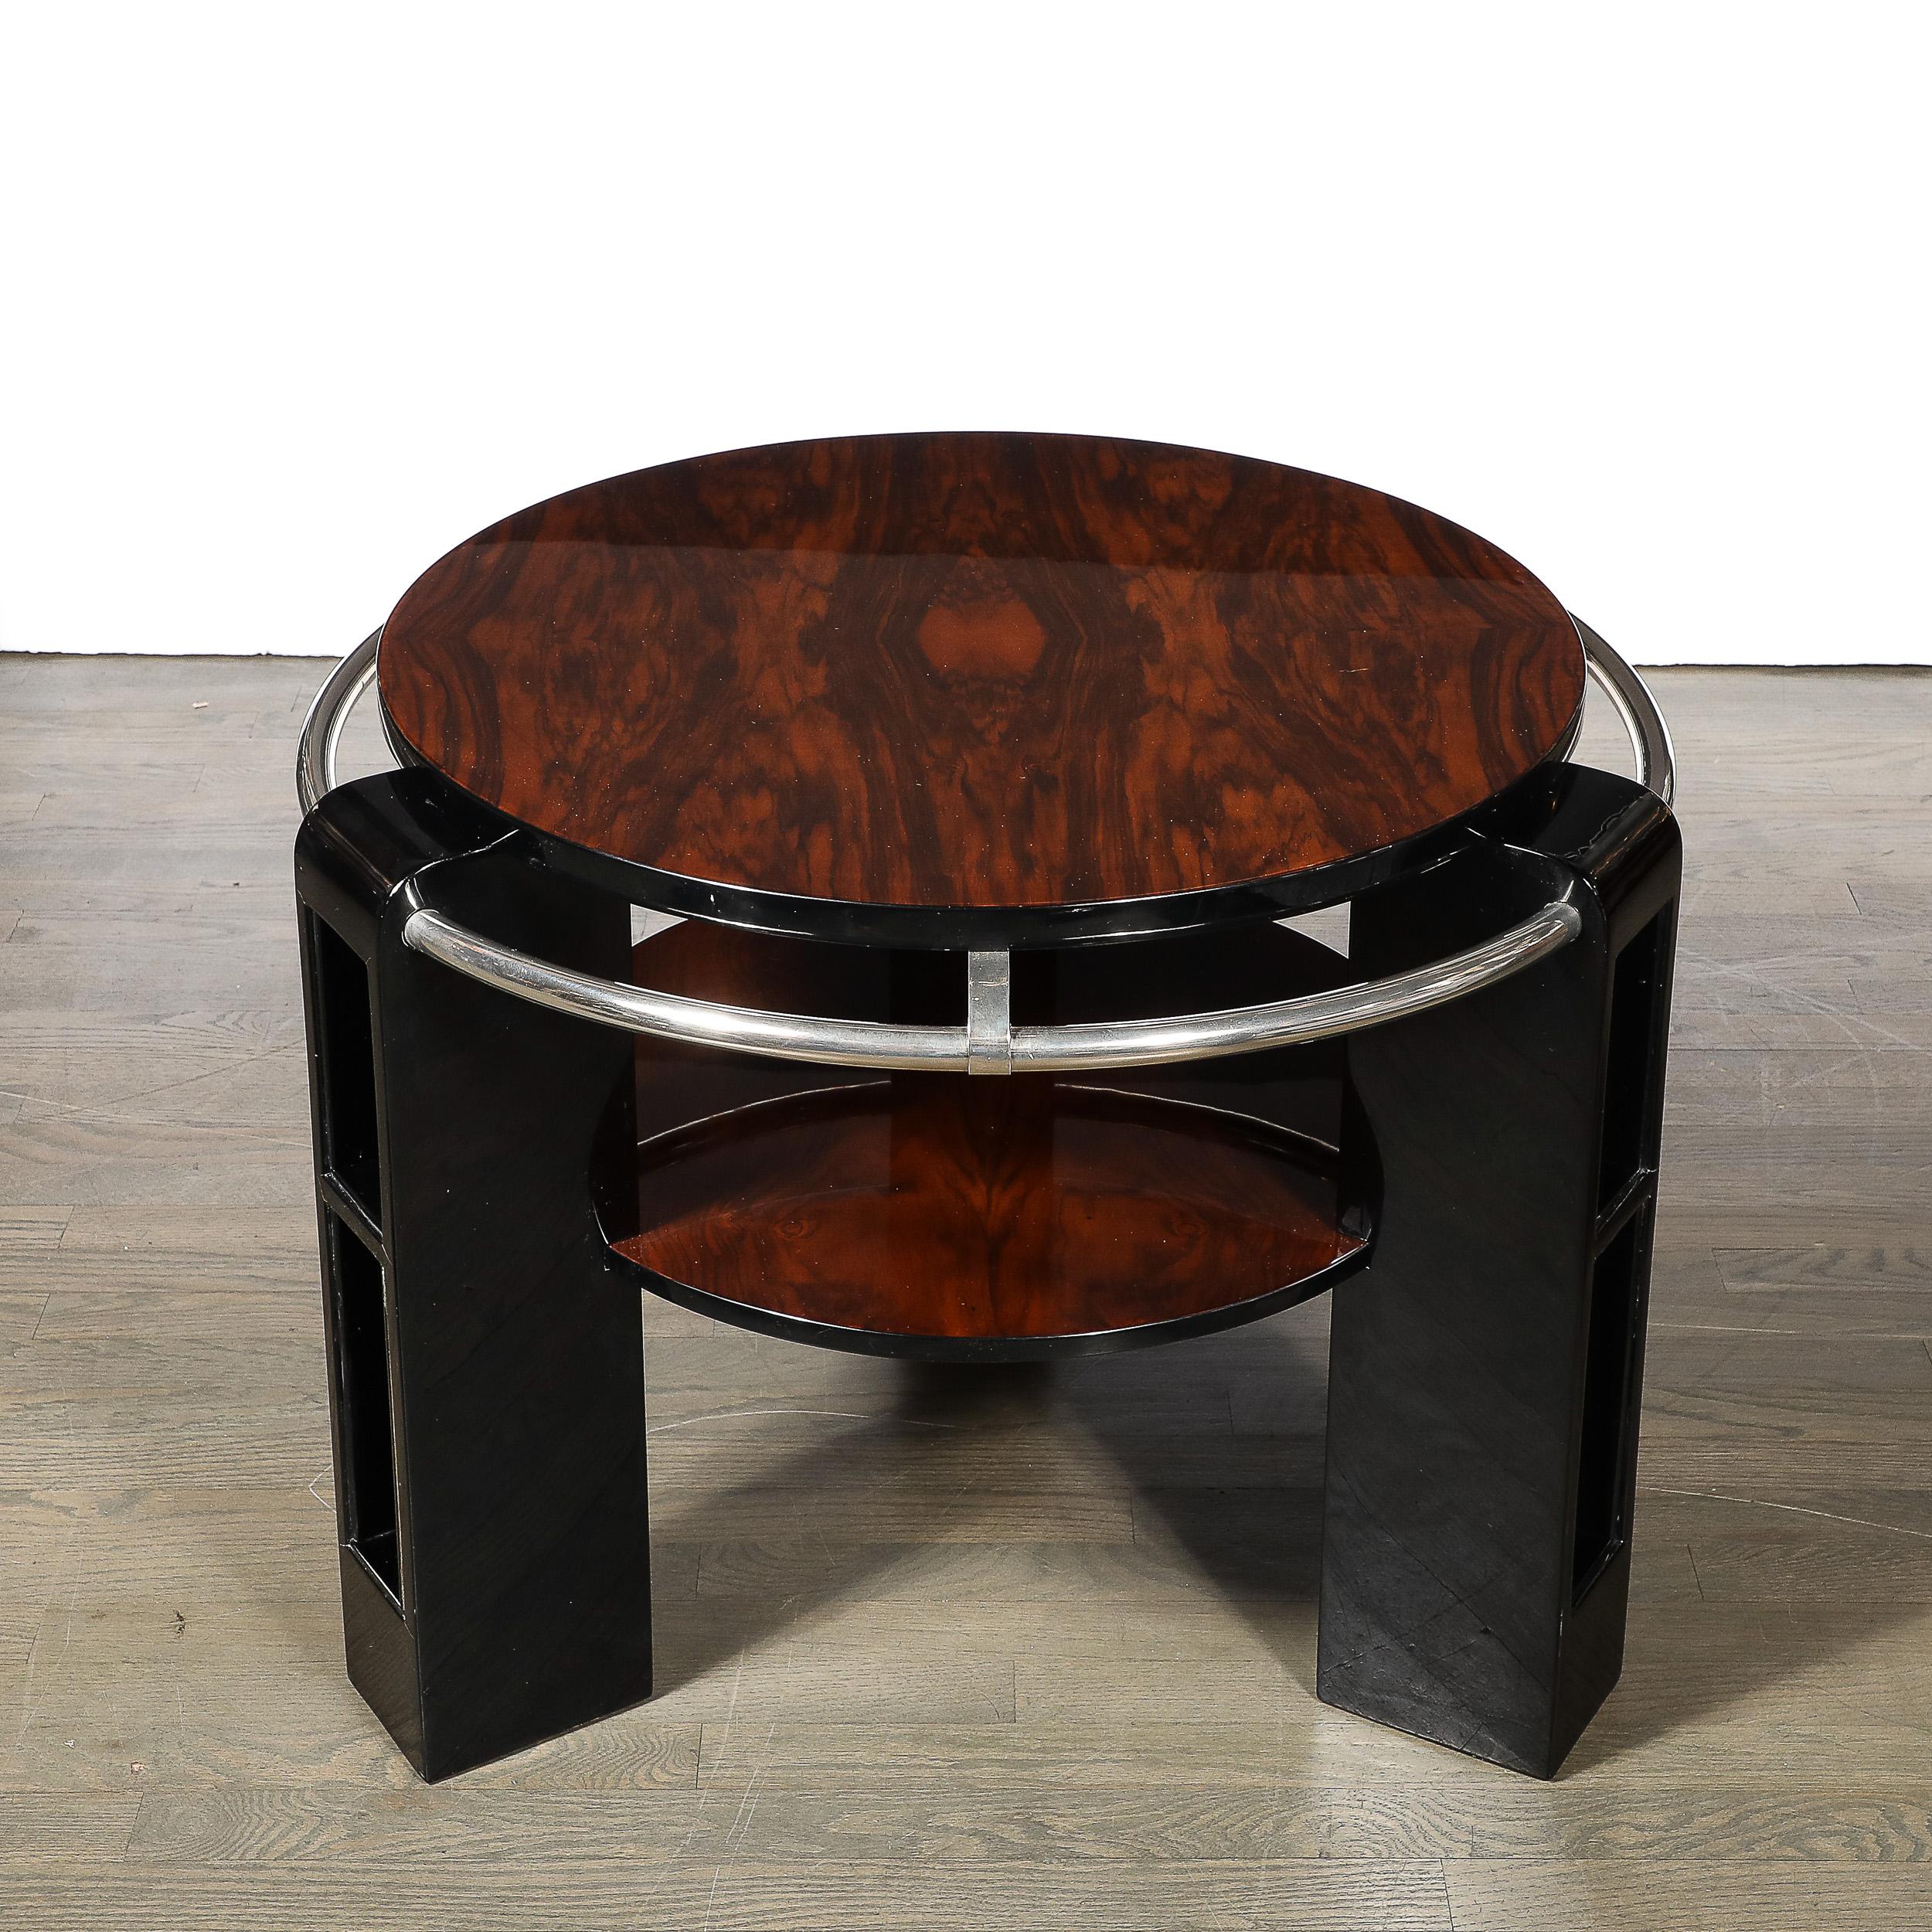 This bold and unique Art Deco Two-Tier Occasional Table W/Chrome Rail Detailing & Shelved Supports in Book-matched Walnut and Black Lacquer originates from France, Circa 1930. Features three supports finished in gleaming black lacquer with